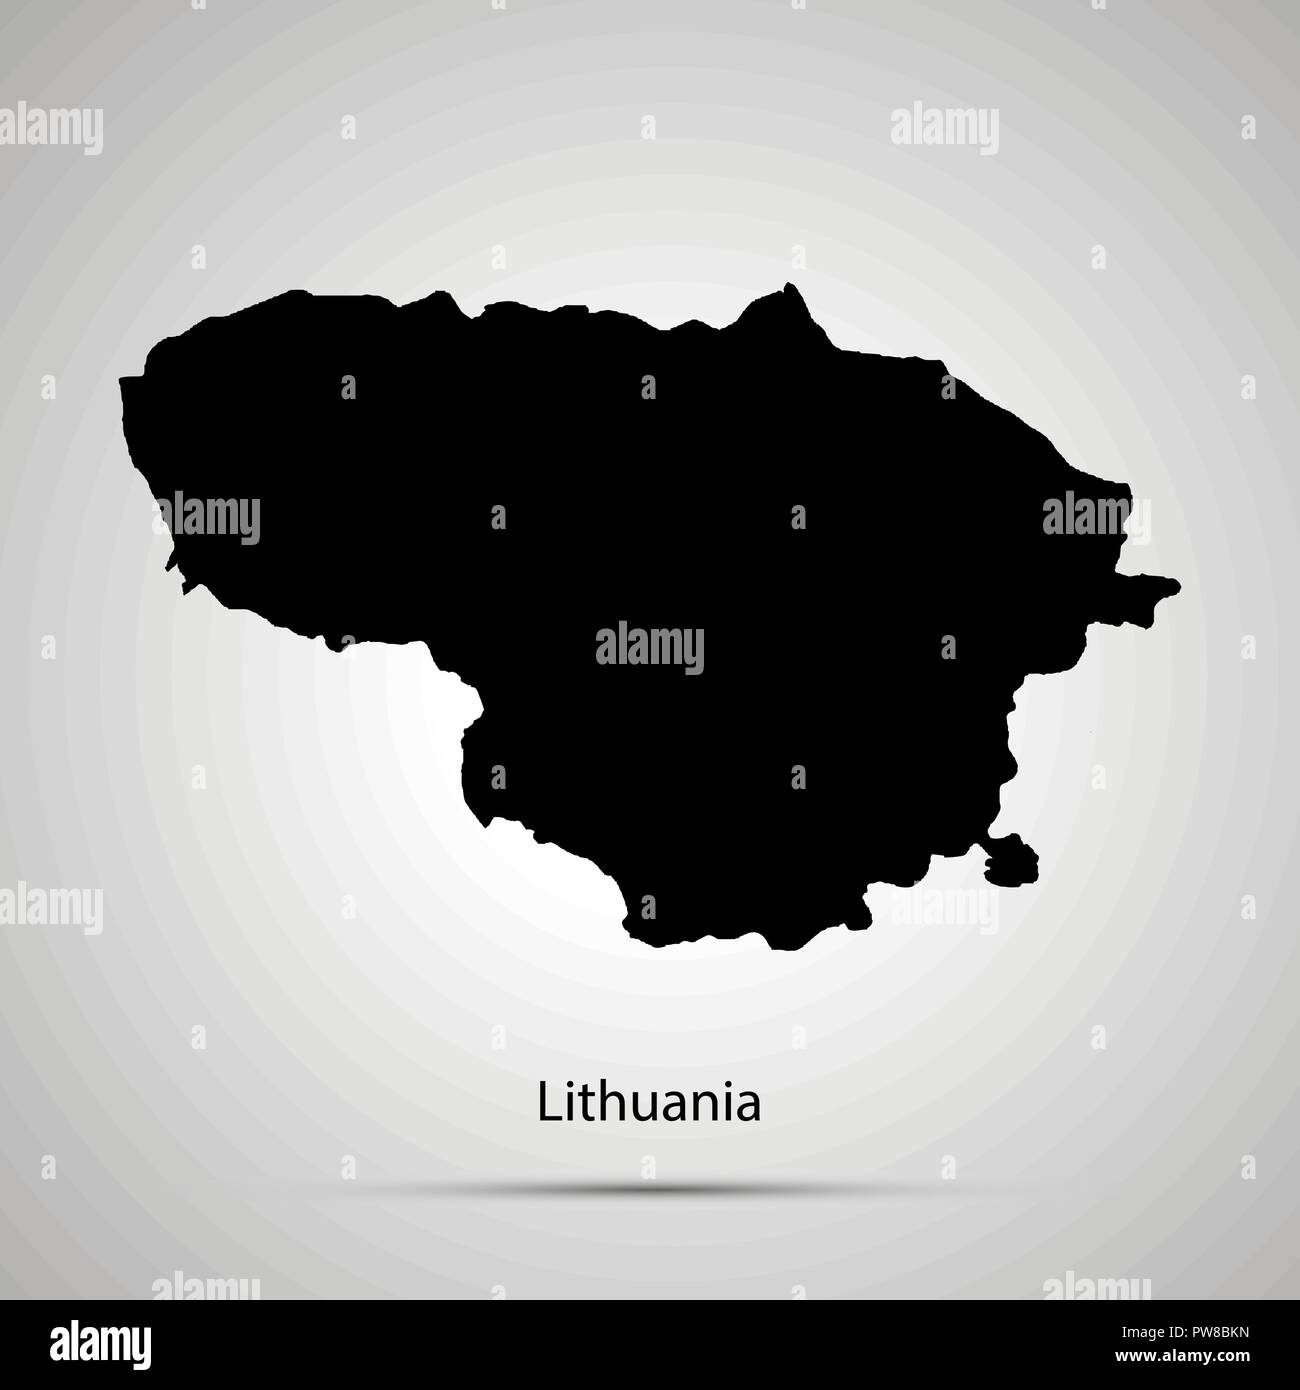 Lithuania country map, simple black silhouette on gray Stock Vector